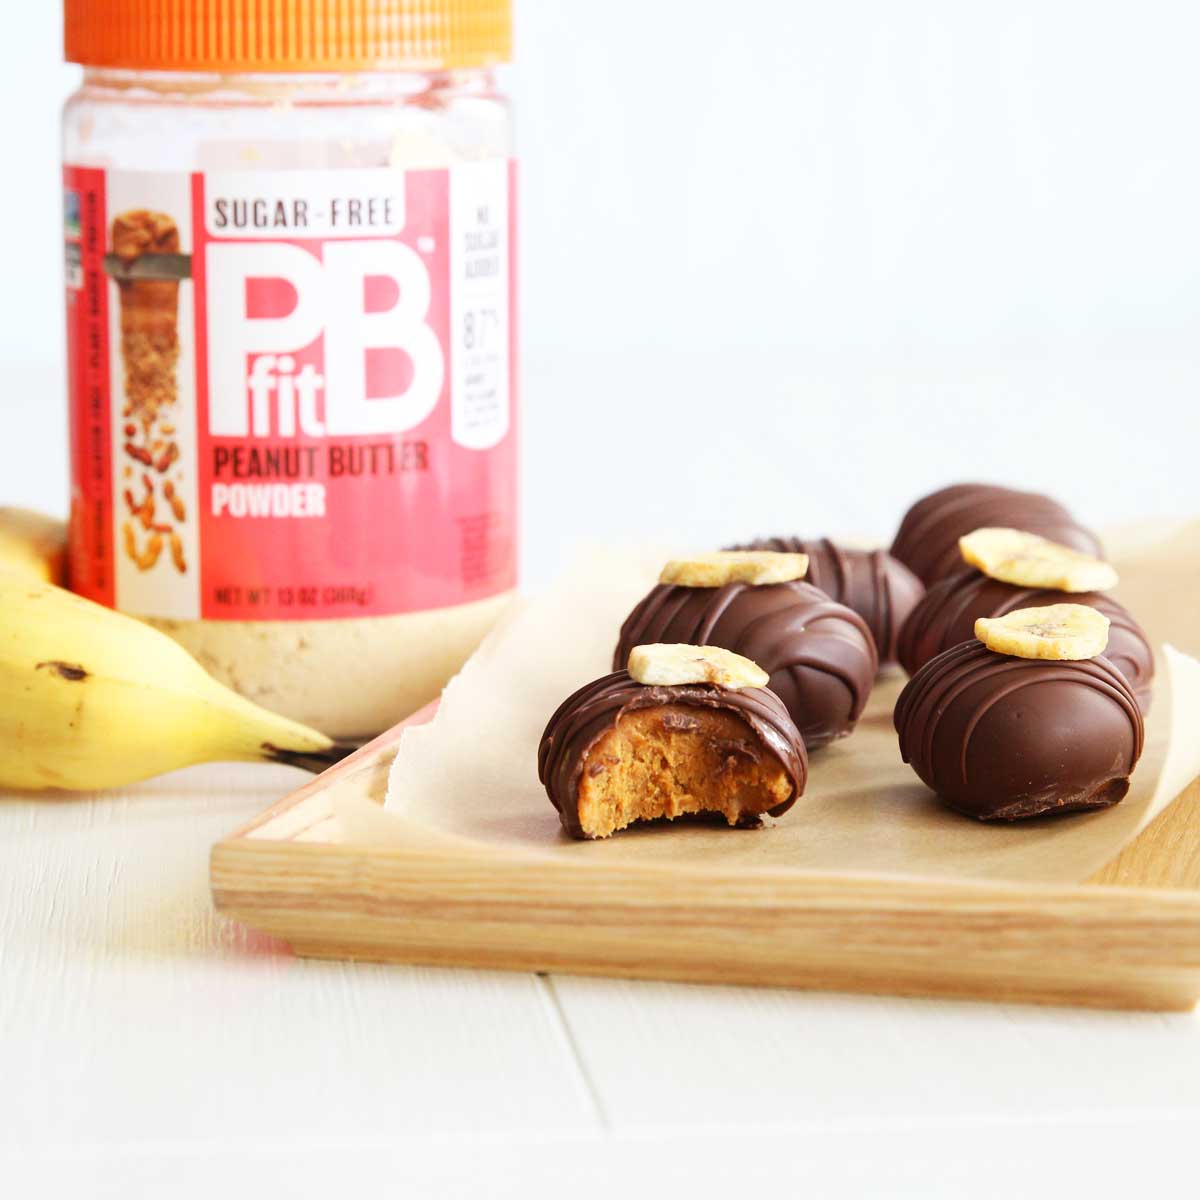 Easy & Delicious Banana Chocolate Easter Eggs Recipe with PB Fit - Only 3 Ingredients! - Sticky Rice Potato Dumplings